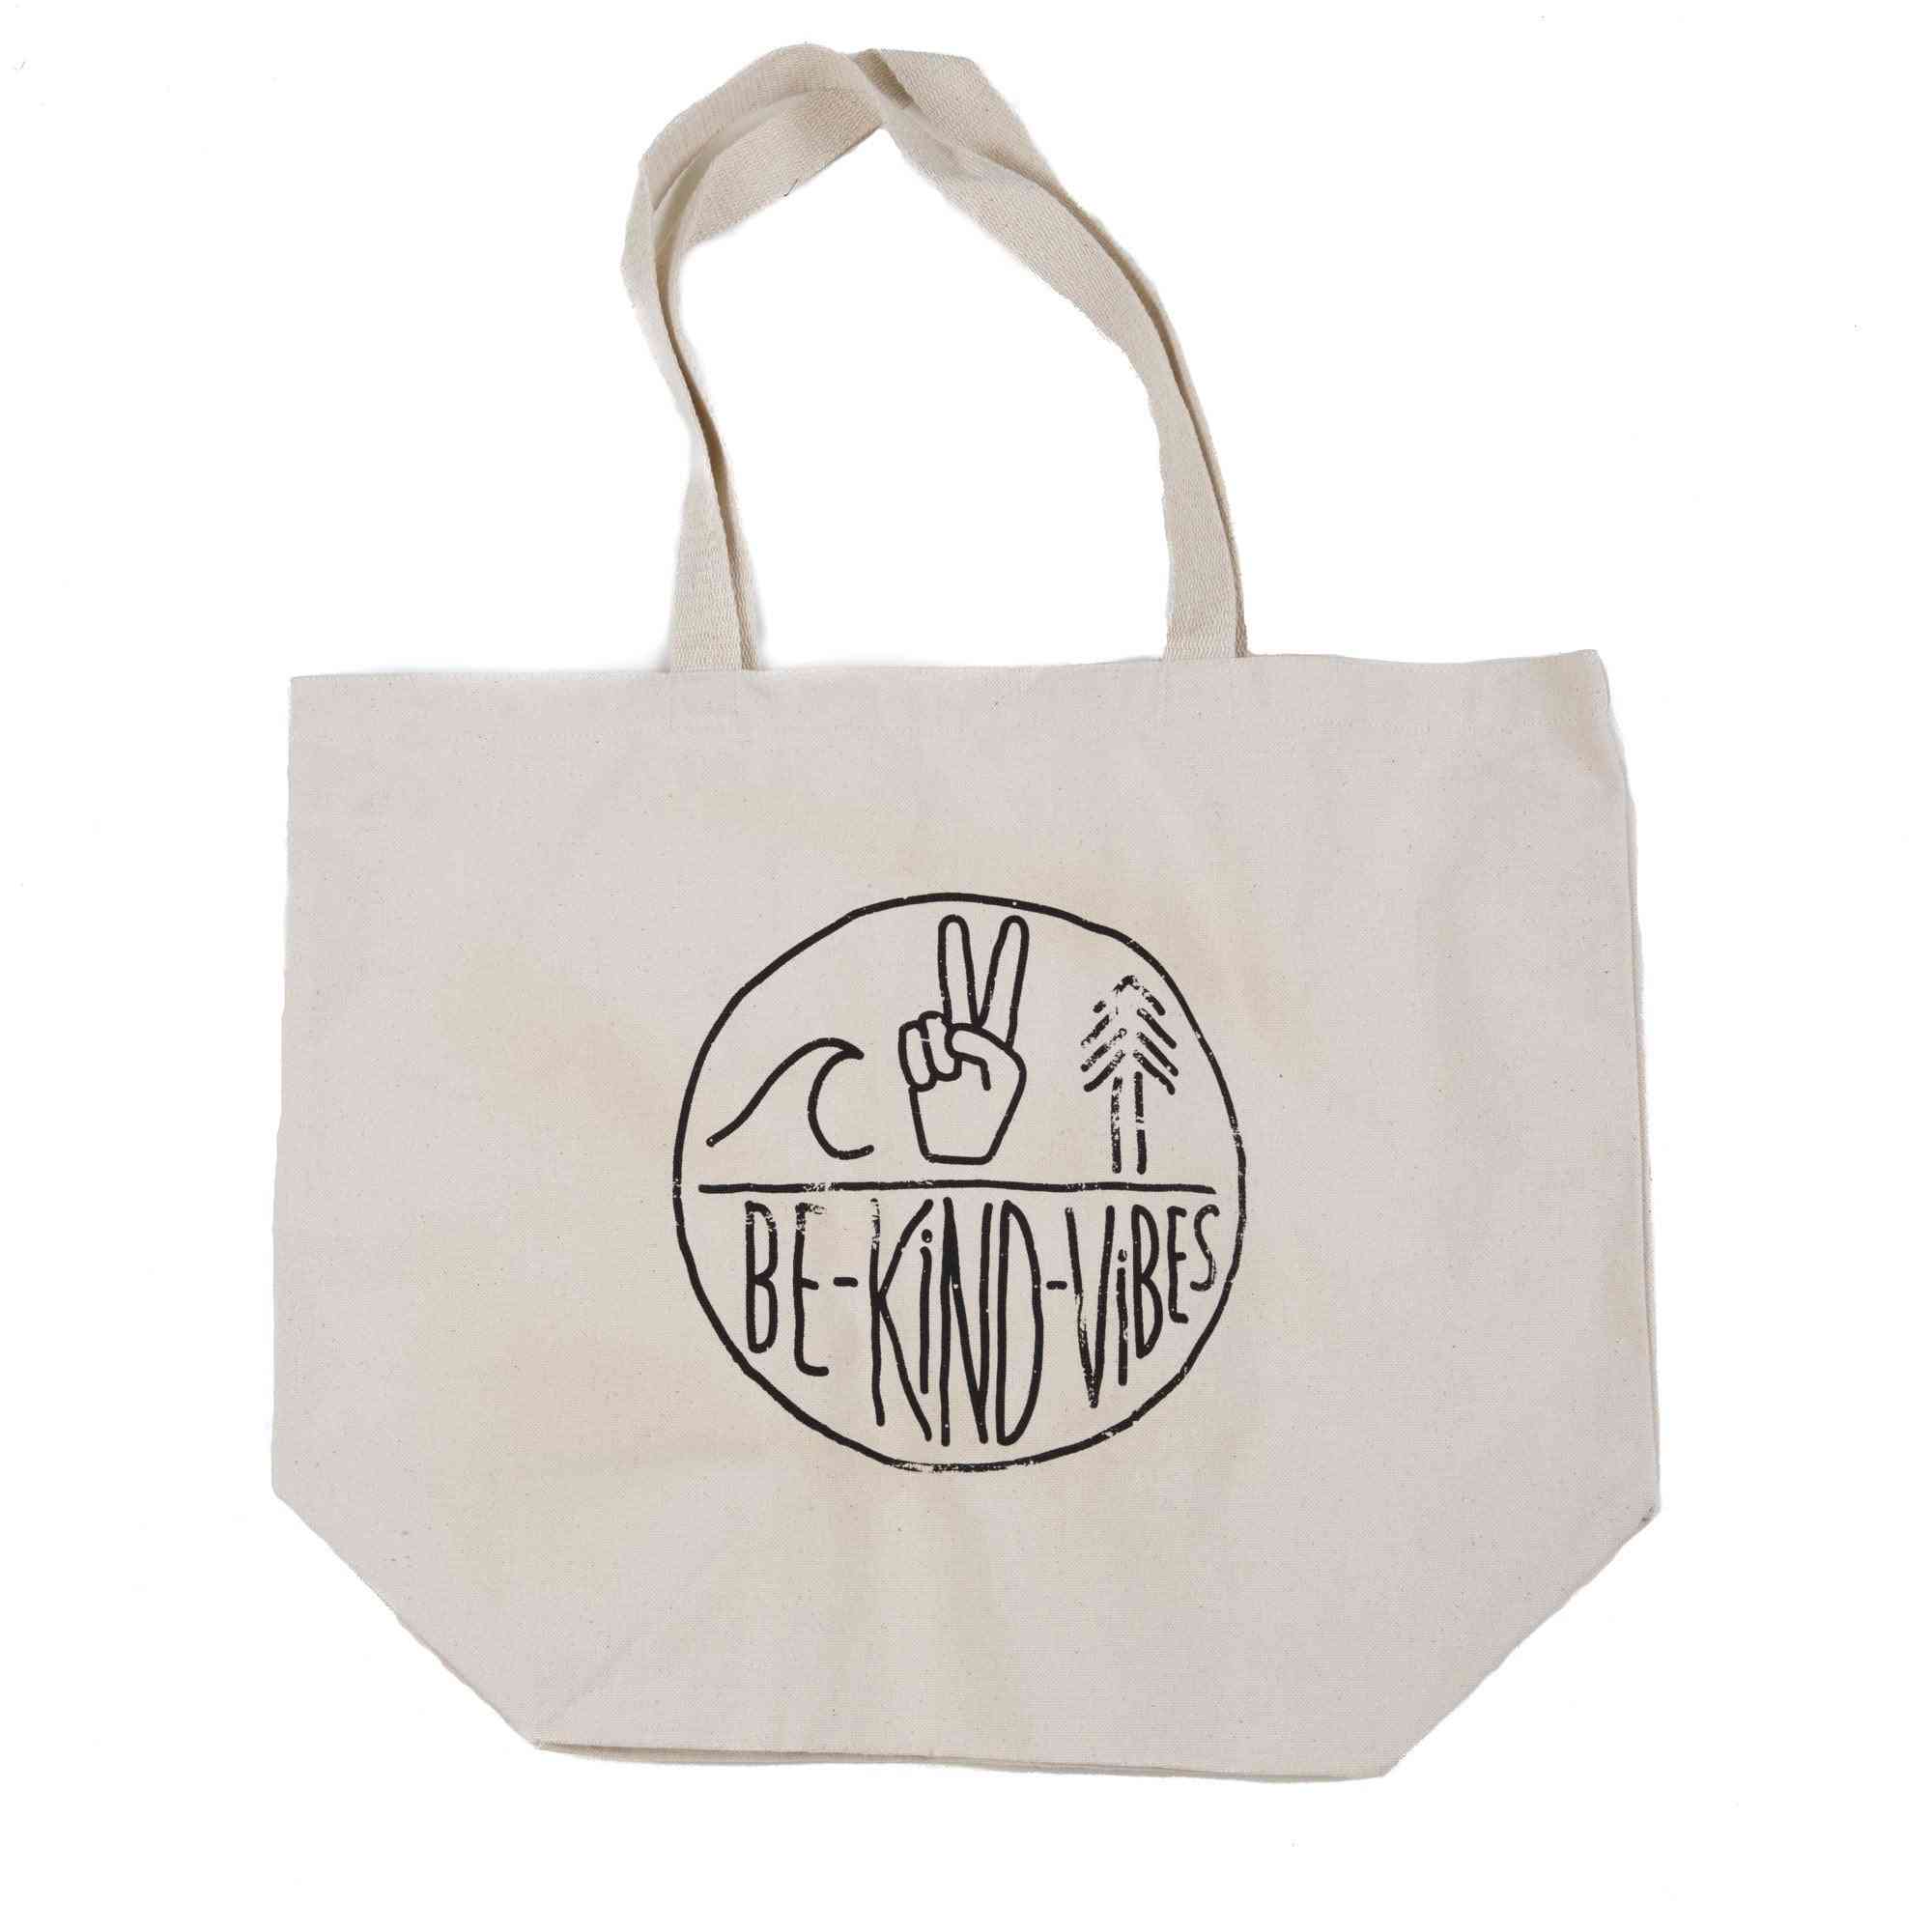 Be-kind-vibes Tote Bag